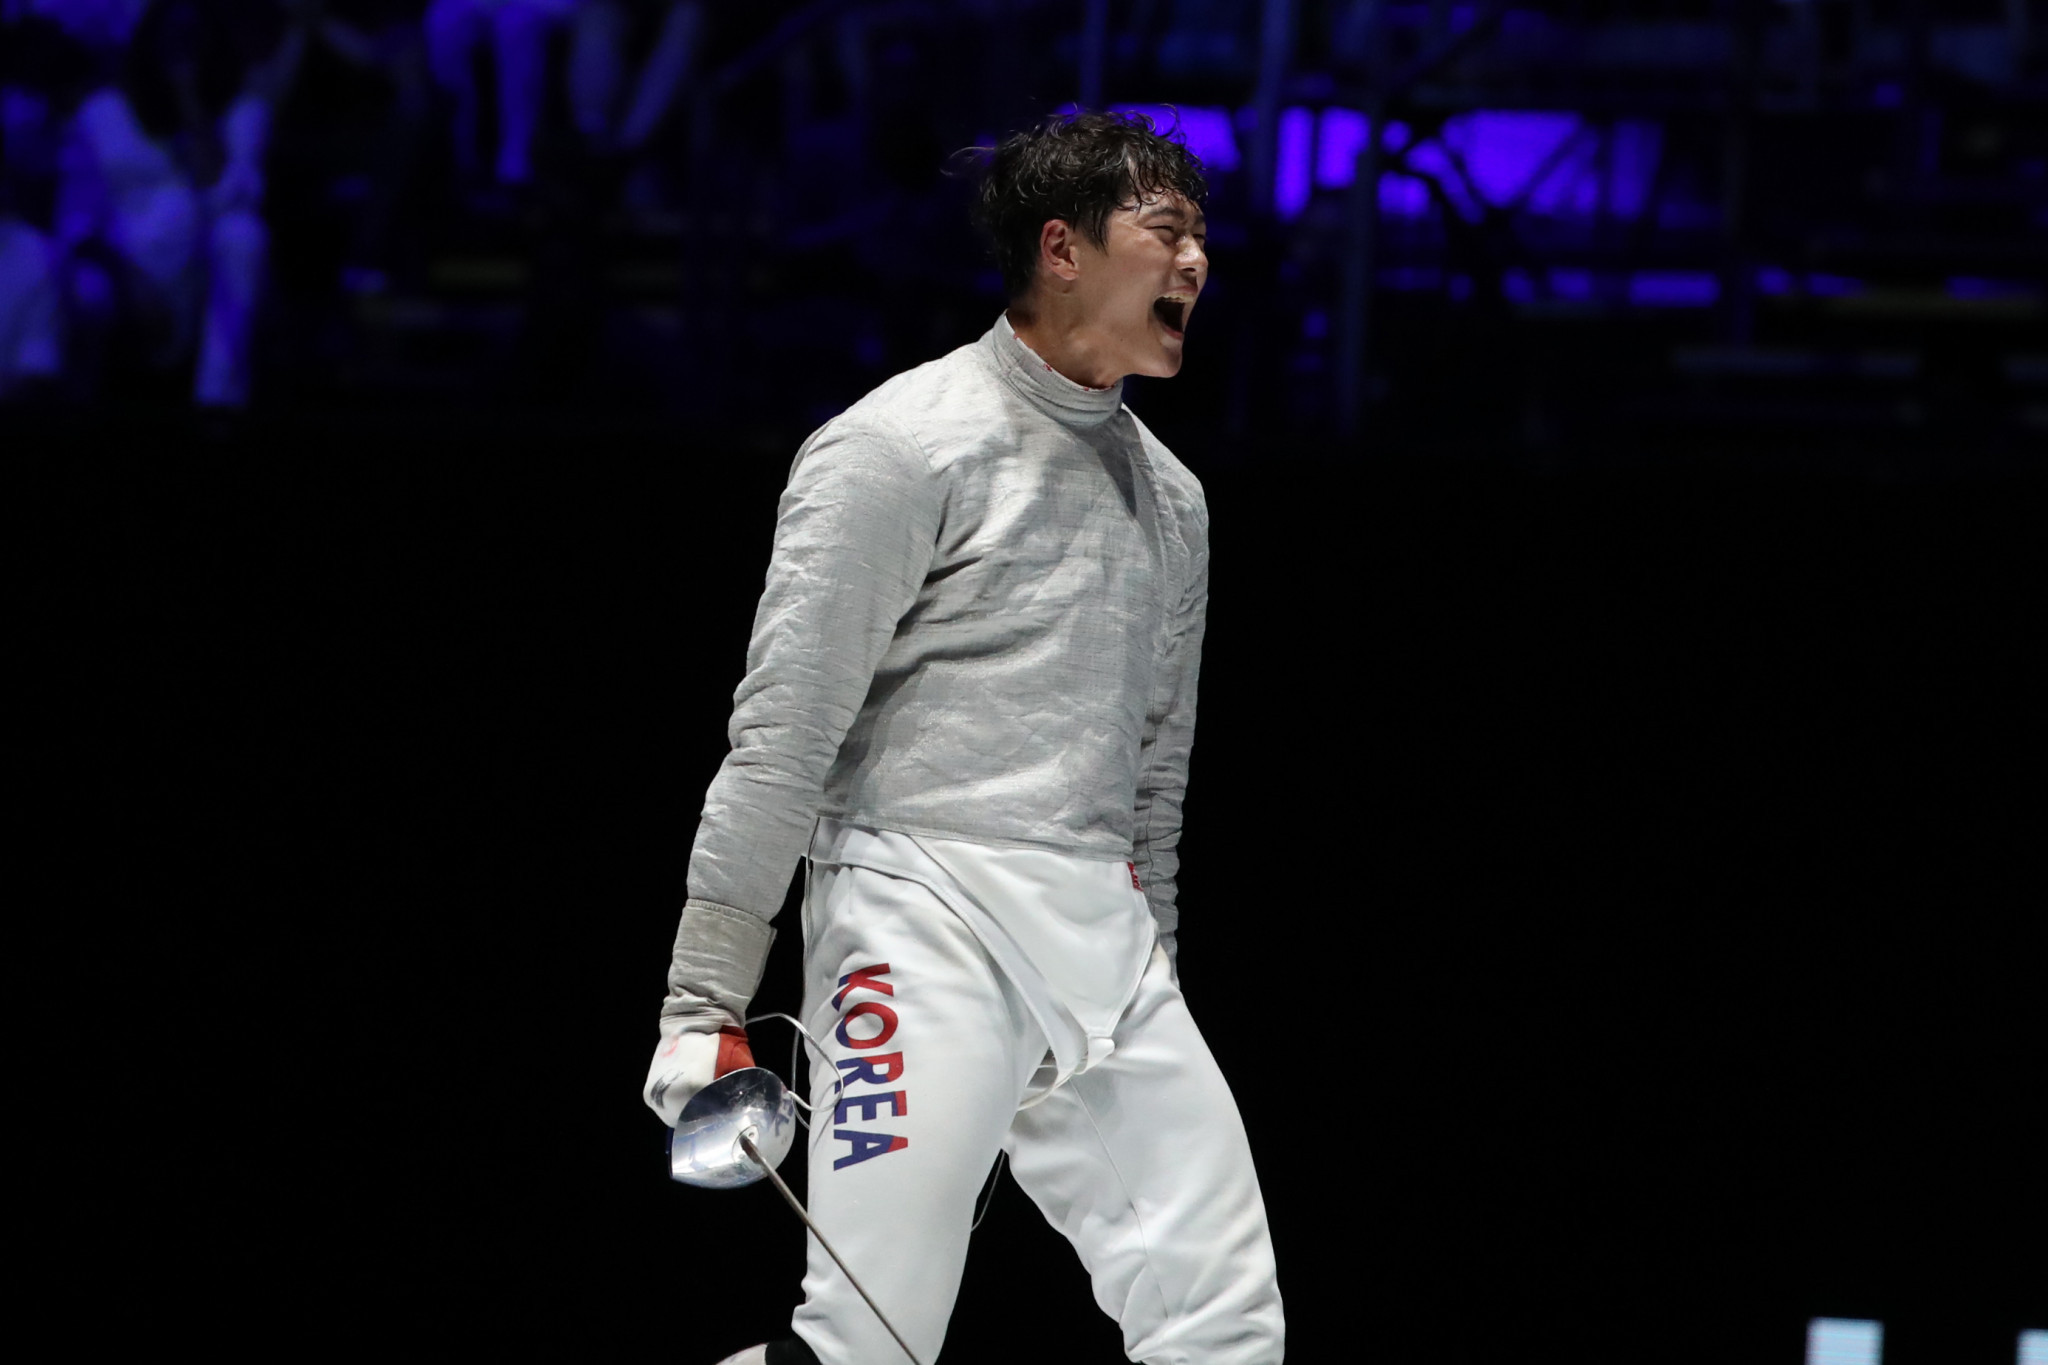 World champion Oh going for gold at FIE Men's Sabre World Cup in Cairo